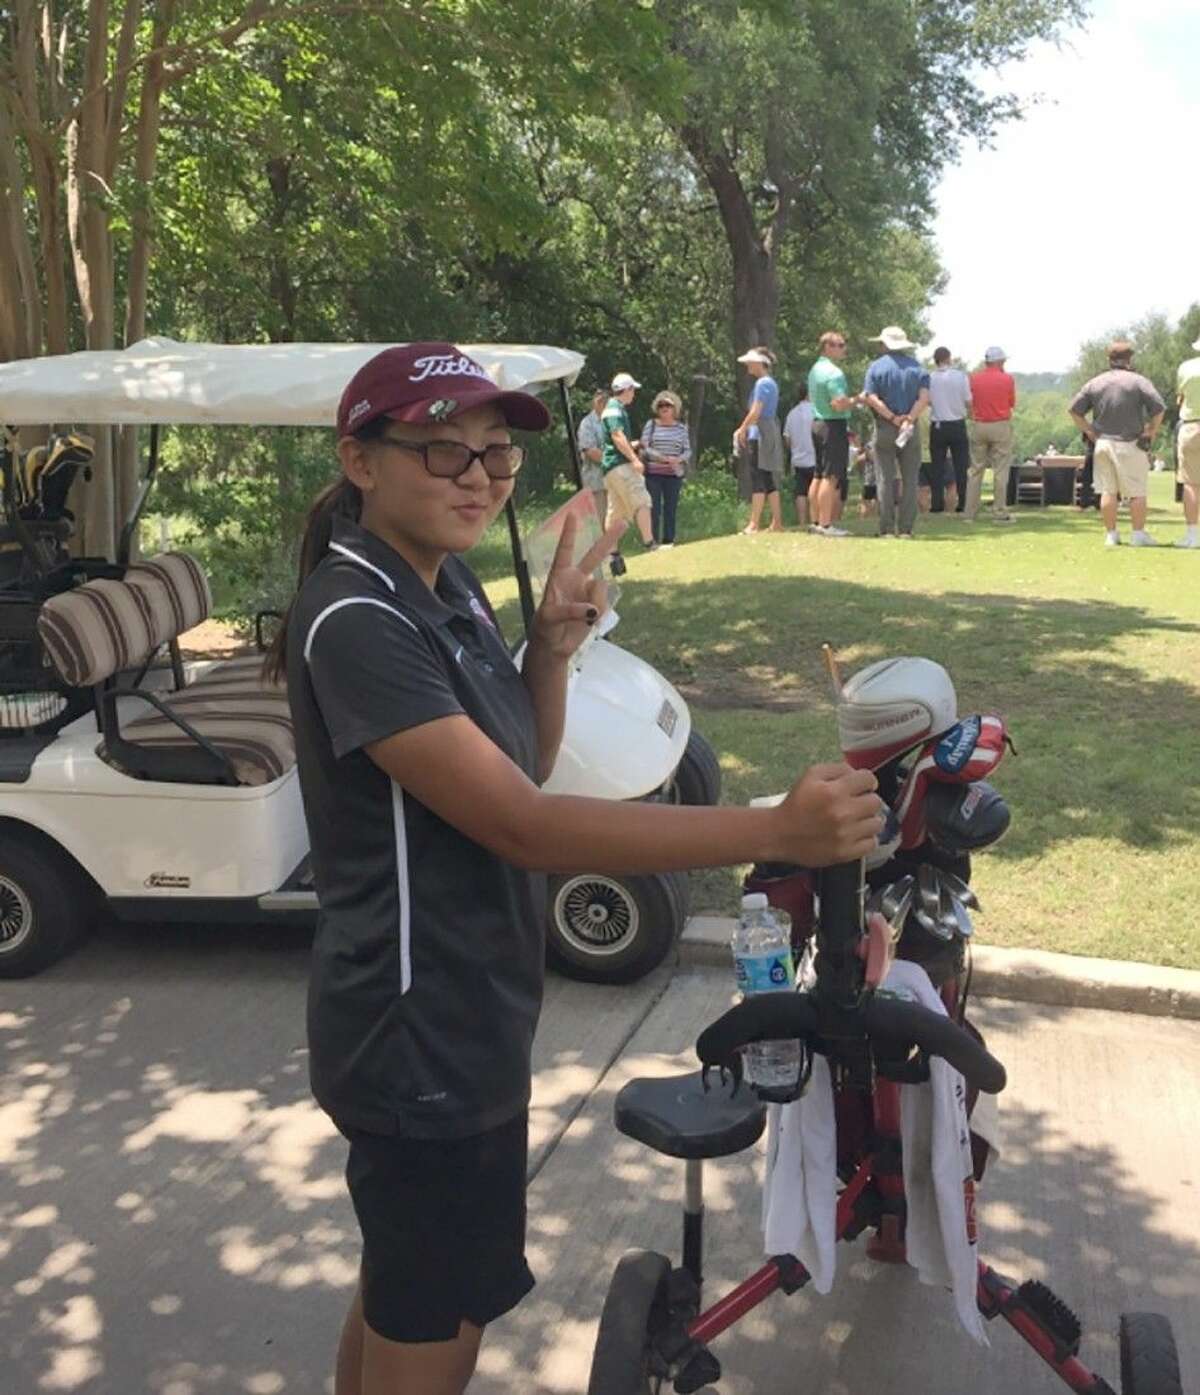 Cy-Fair High School freshman golfer Grace Ni tied for seventh place in the state after shooting a 148 at the UIL Golf State Tournament April 25-26 at Legacy Hills Golf Course in Georgetown.